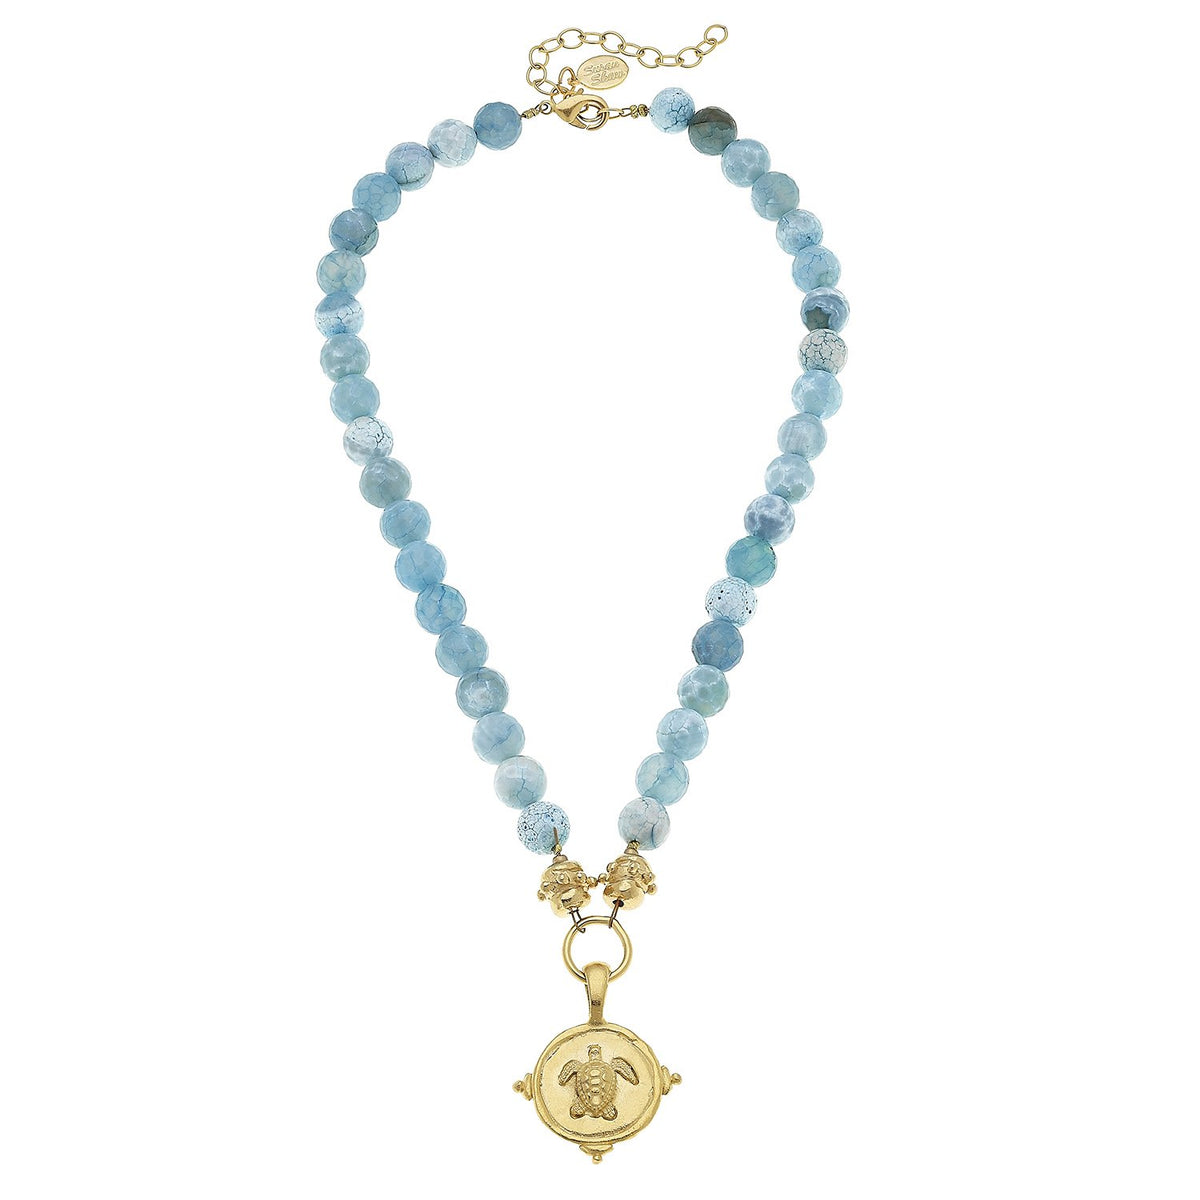 SUSAN SHAW GOLD TURTLE ON AQUA FIRE AGATE NECKLACE